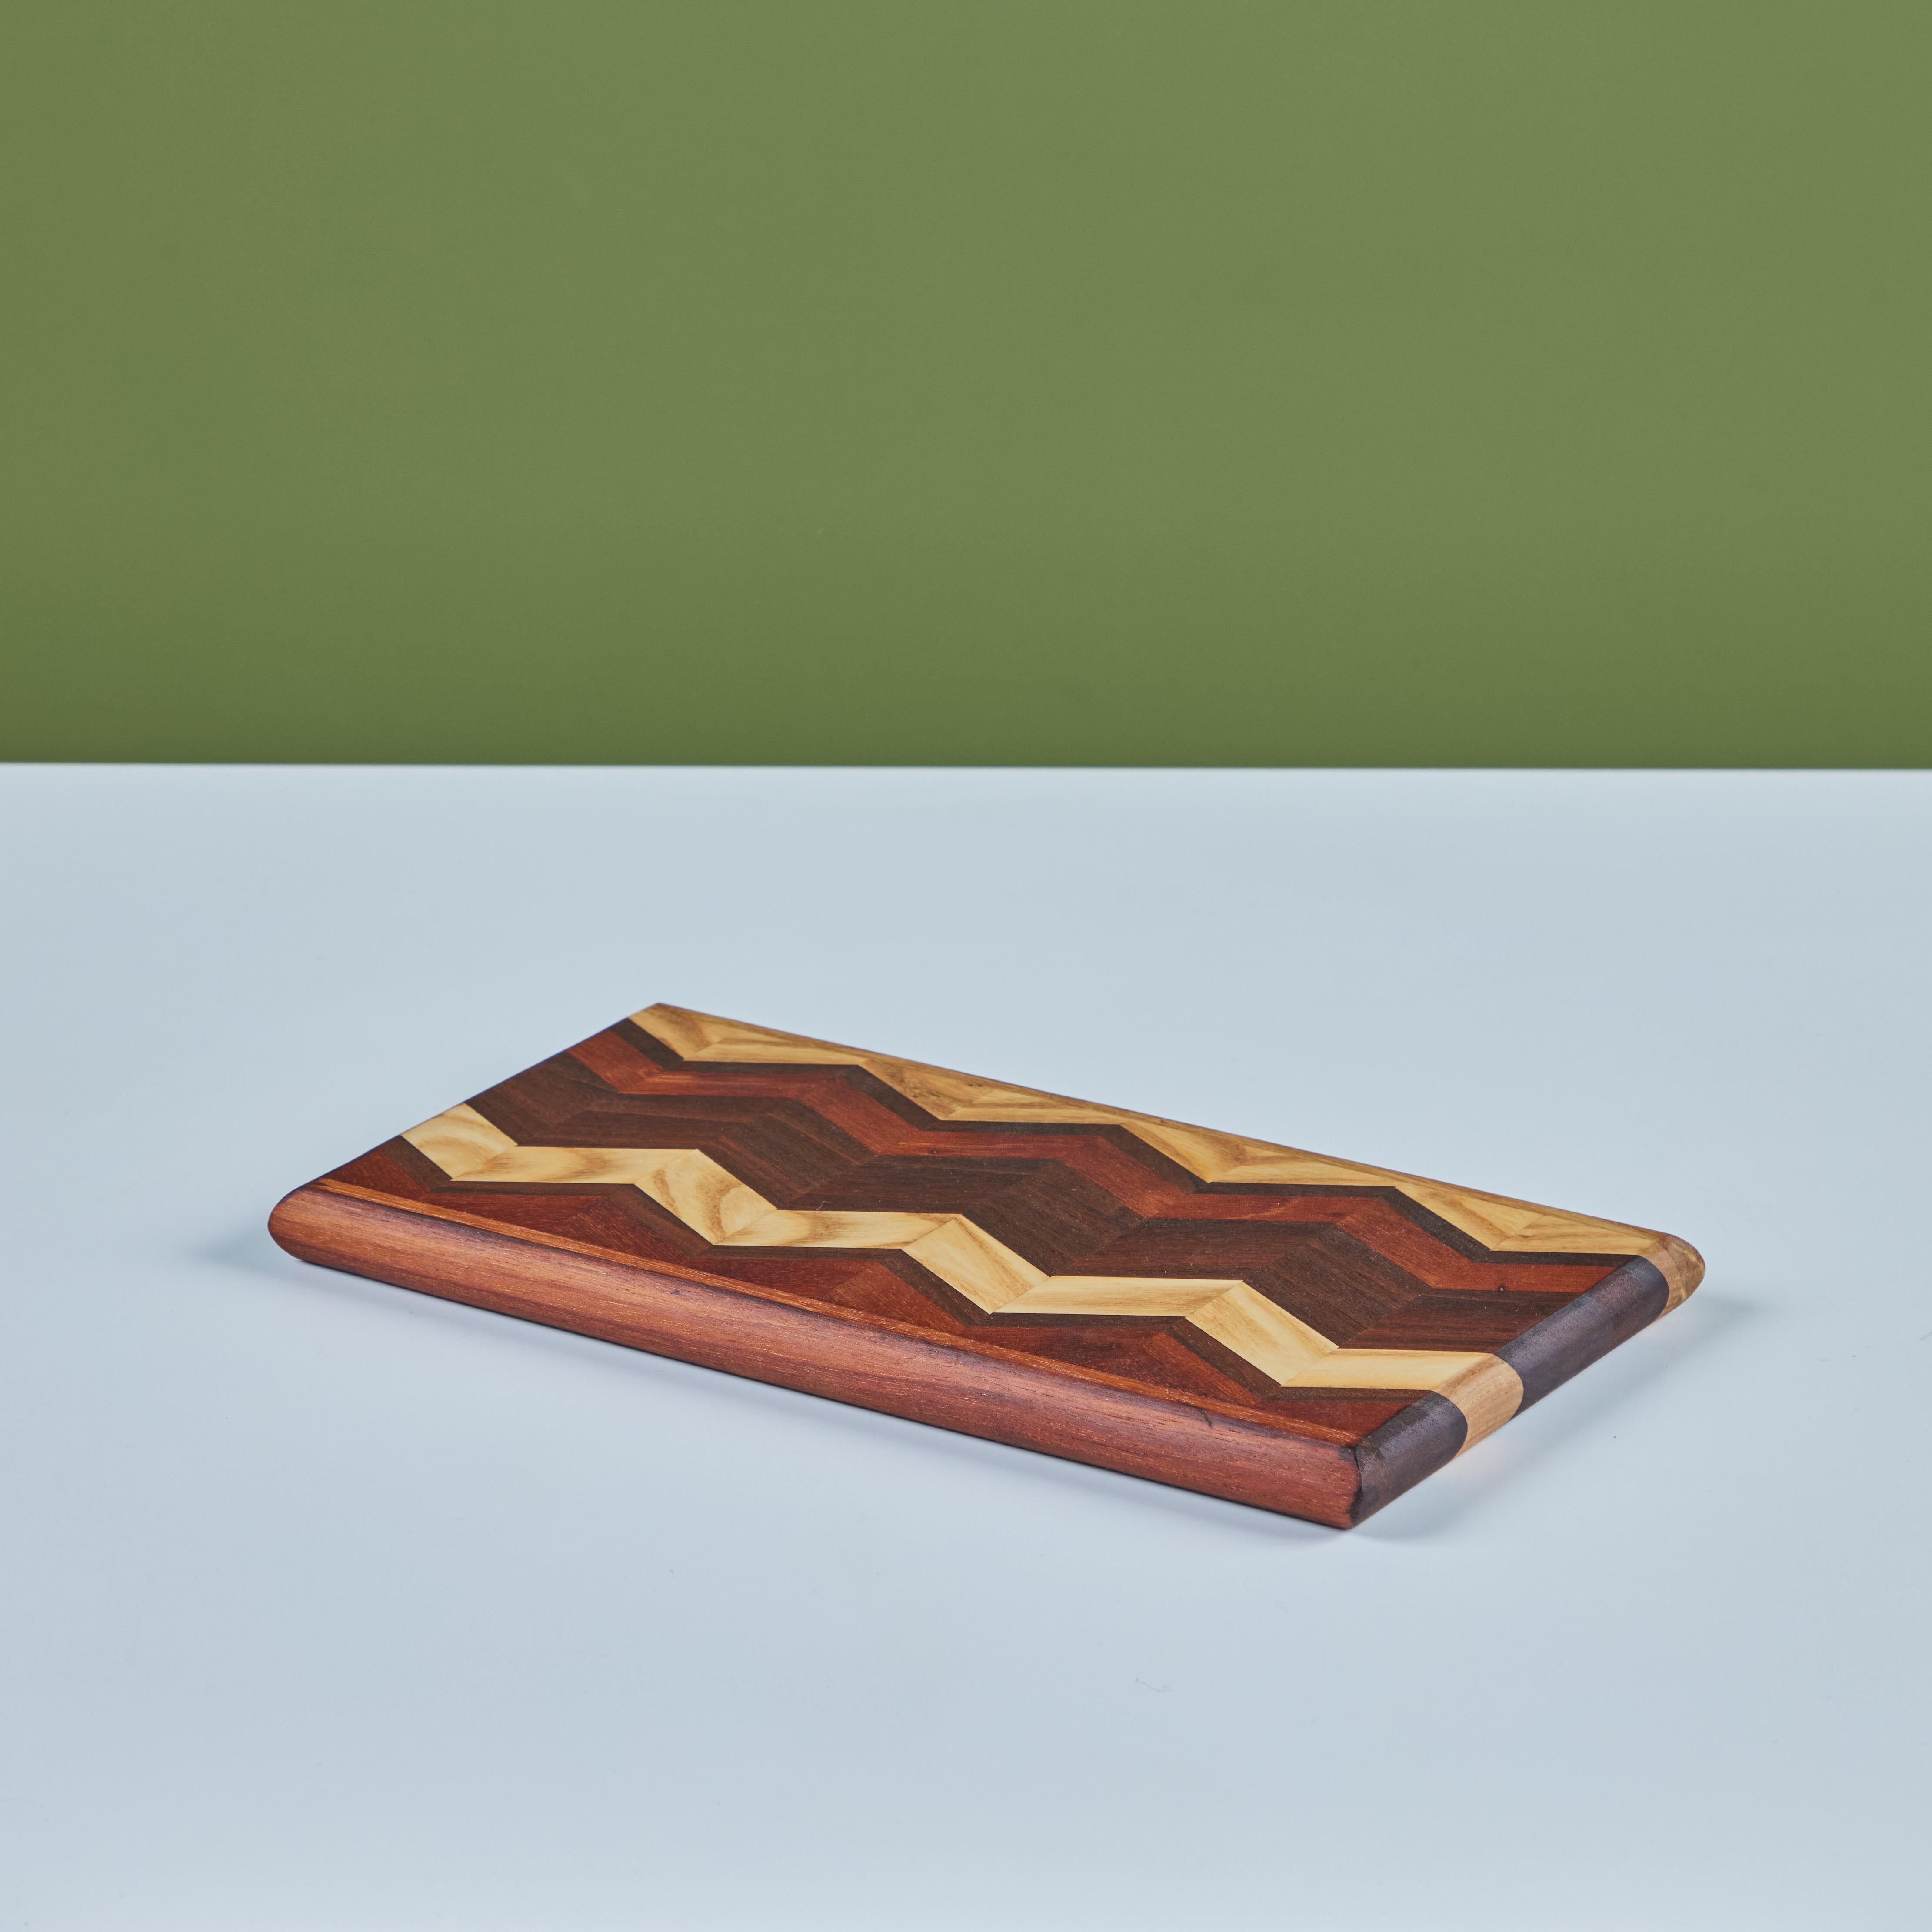 20th Century Don Shoemaker Wood Inlaid Chevron Pattern Cutting Board for Señal For Sale